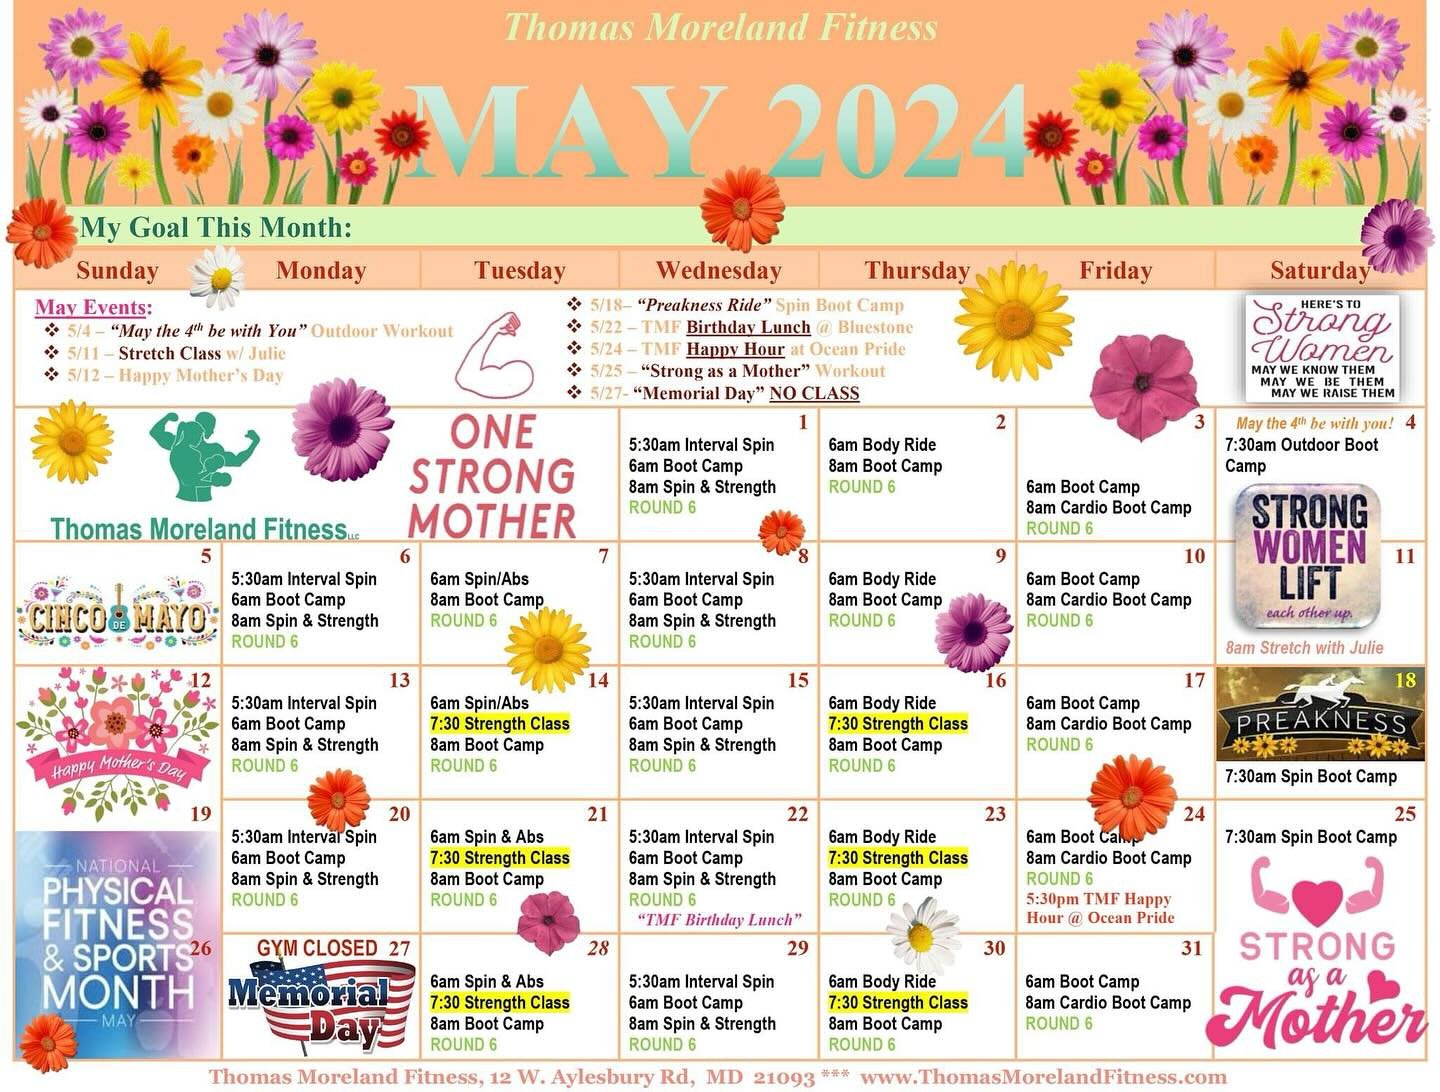 🌸 May at TMF 🌸 

🚲 💪 Pop in to try a new class 💪🚲

🎉 🎊join a celebration workout 🎊🎉

💫✨make a connection at one of our out-of-gym get togethers! ✨💫